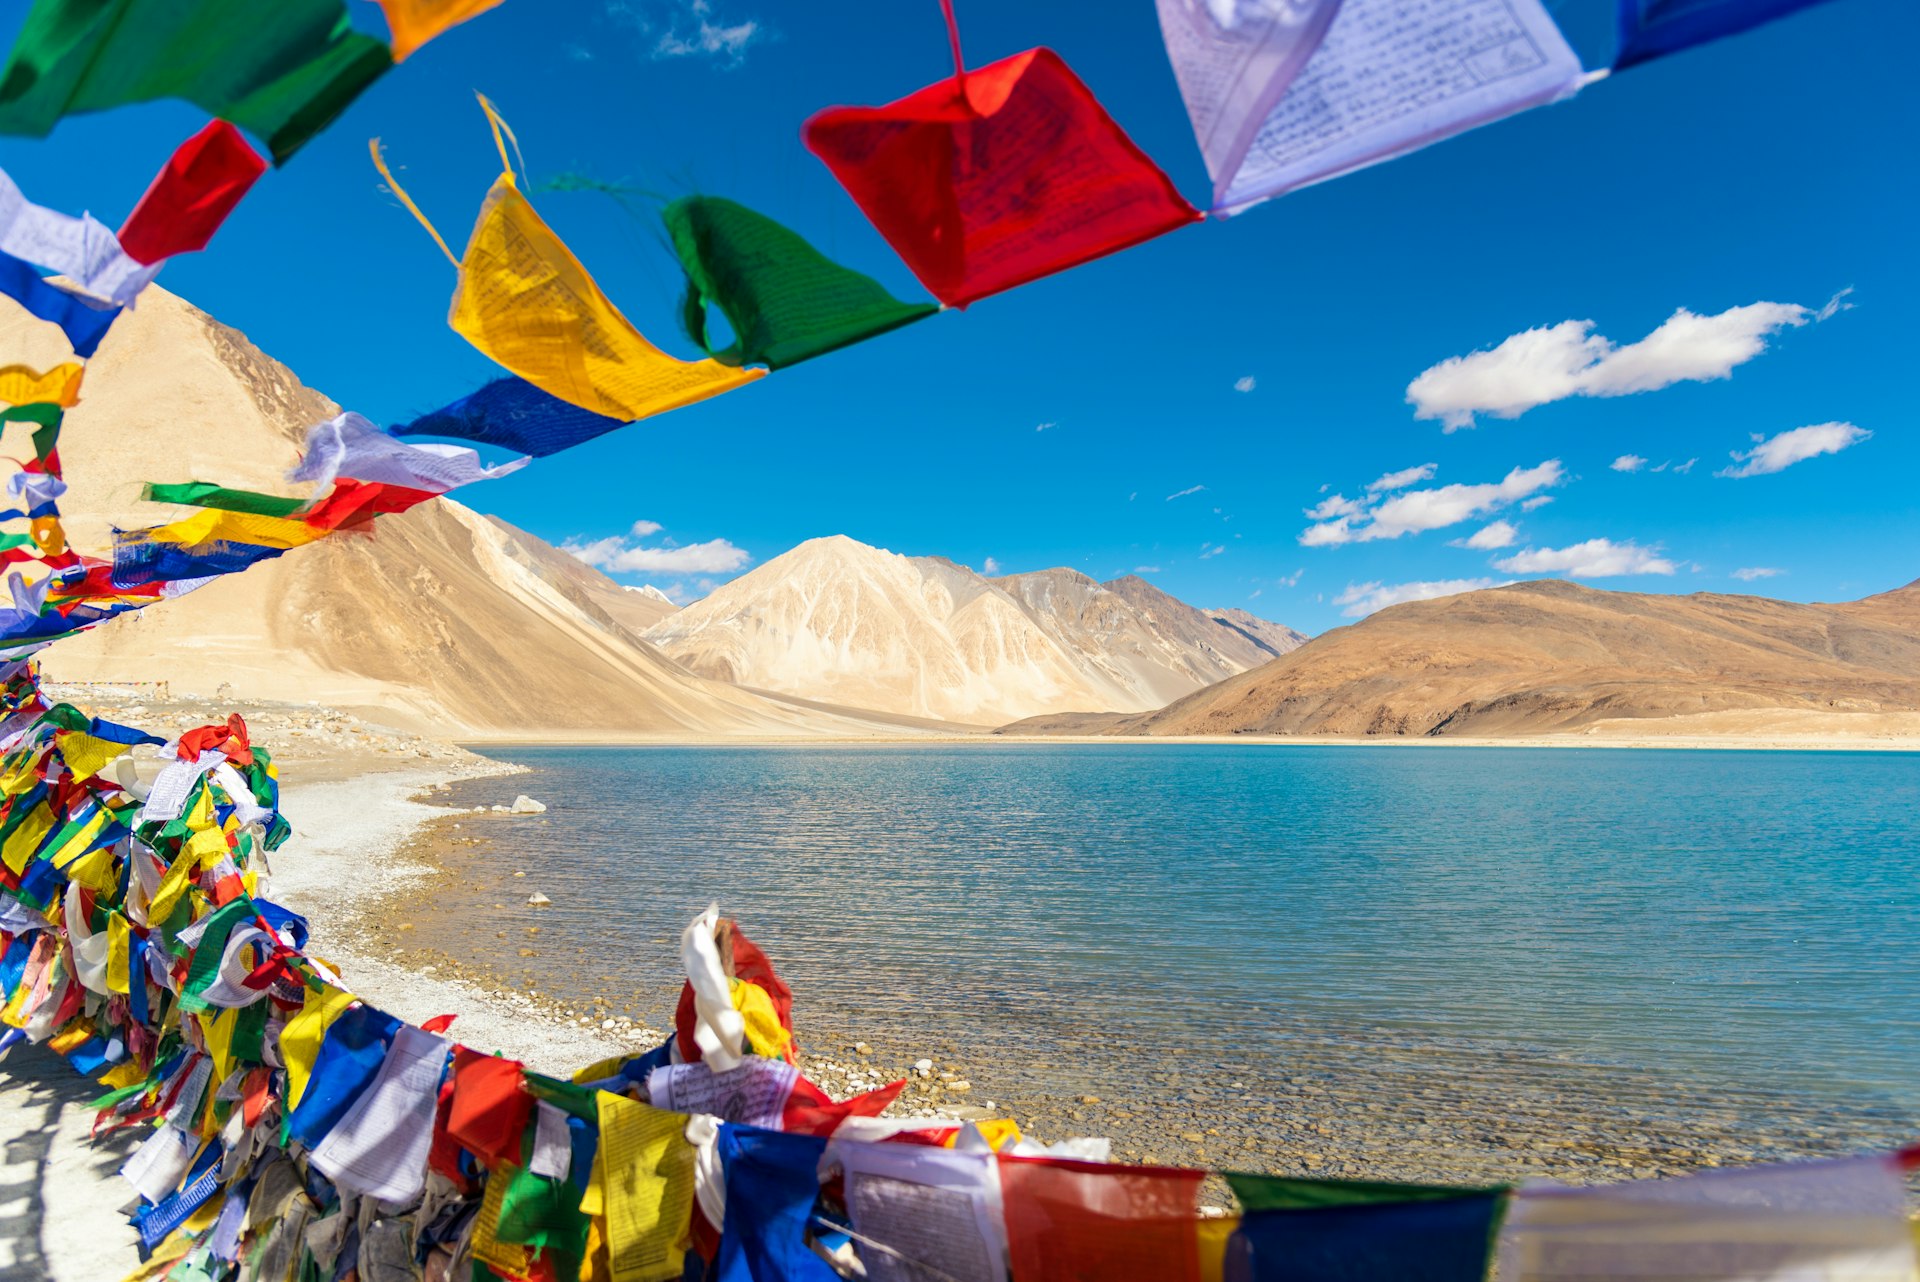 Brightly colored prayer flags flutter in the breeze beside a bright, clear lake surrounded by sandy colored hills